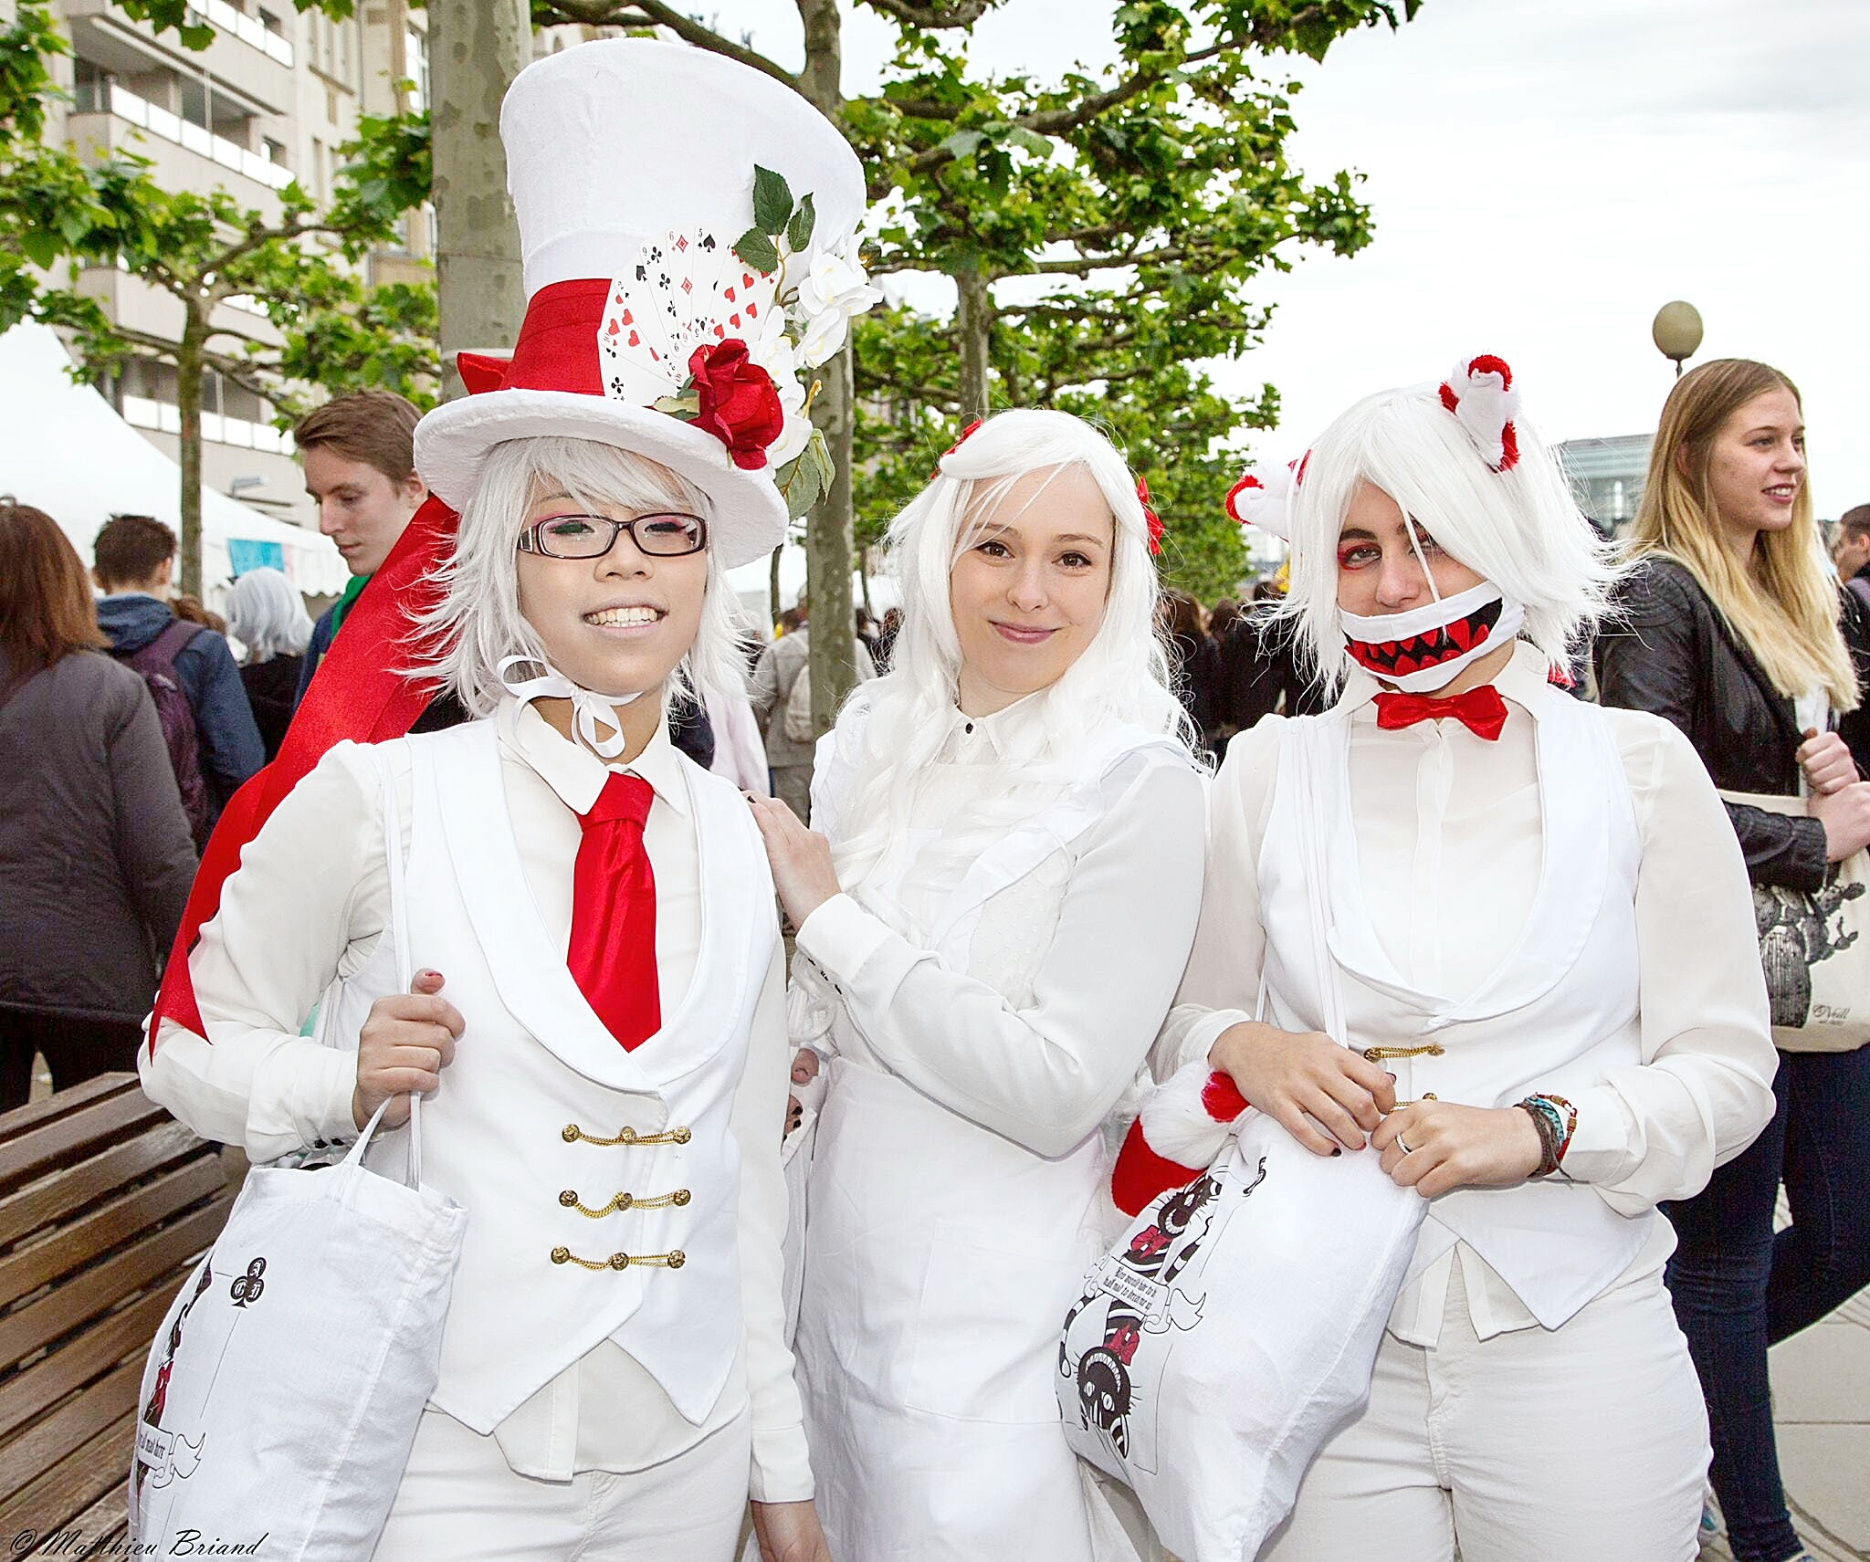 MY FIRST COSPLAY AND JAPAN DAY 2015 – PART II